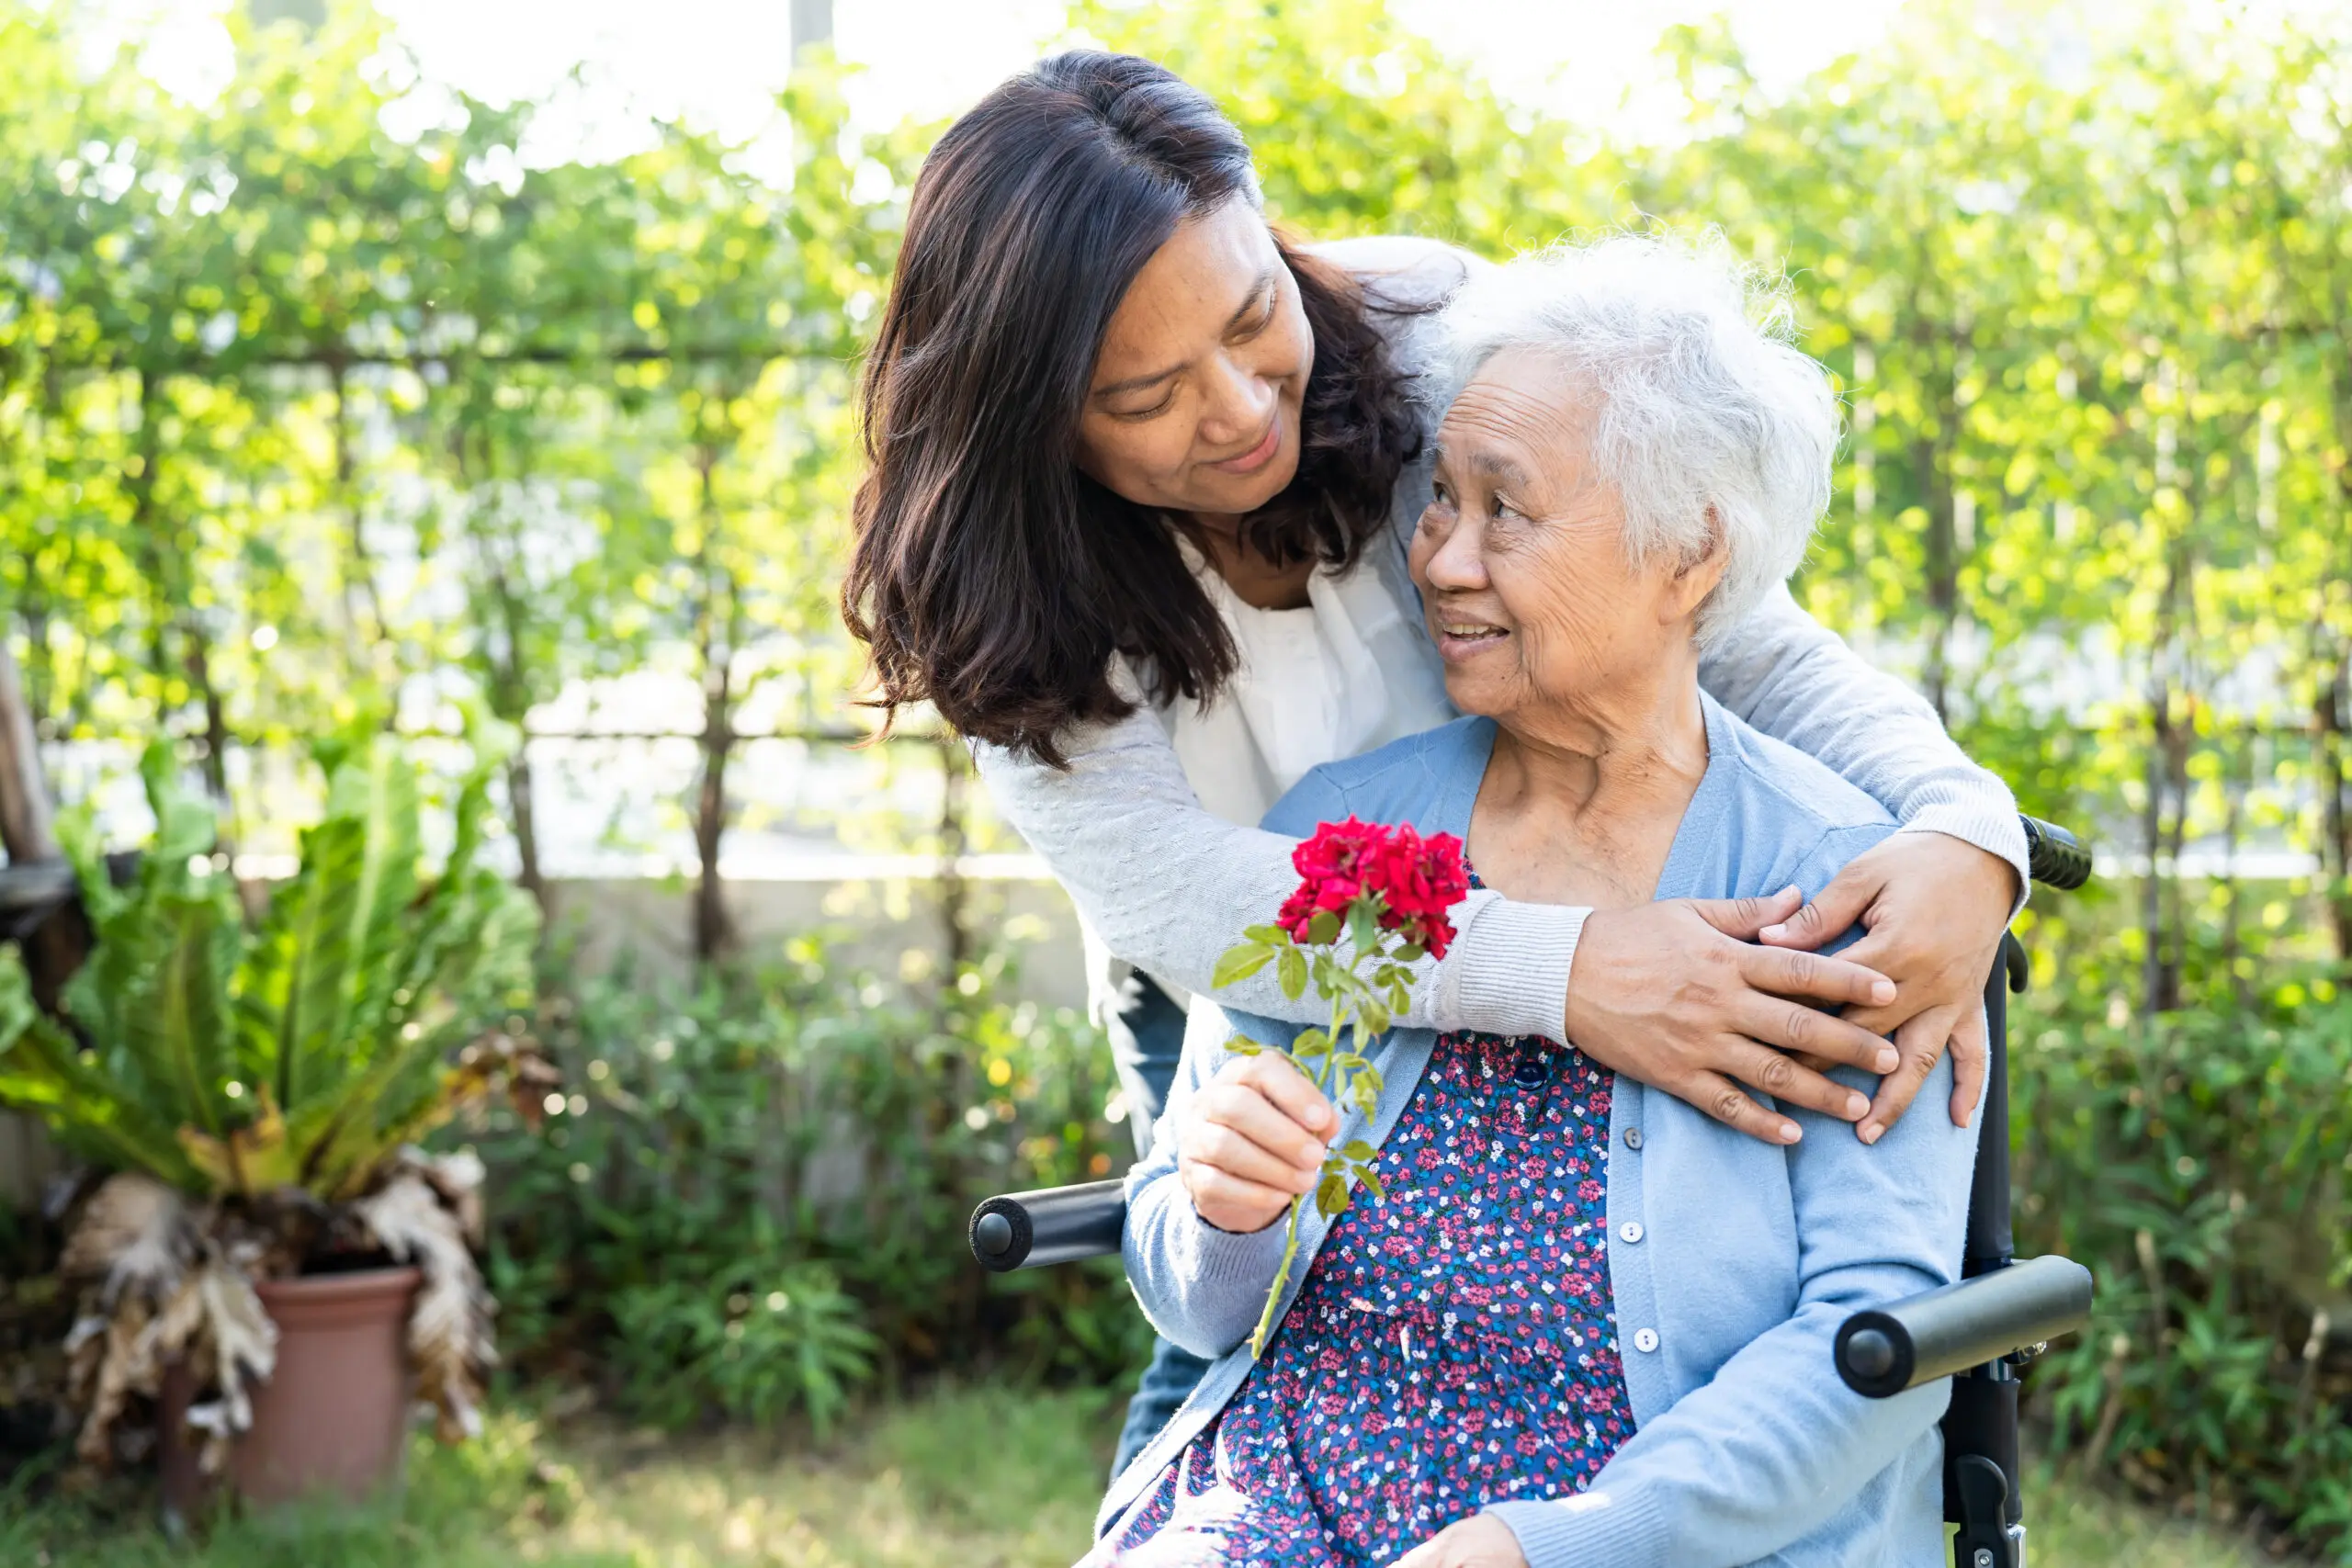 A family members following dementia tips for caregivers to support her mom.